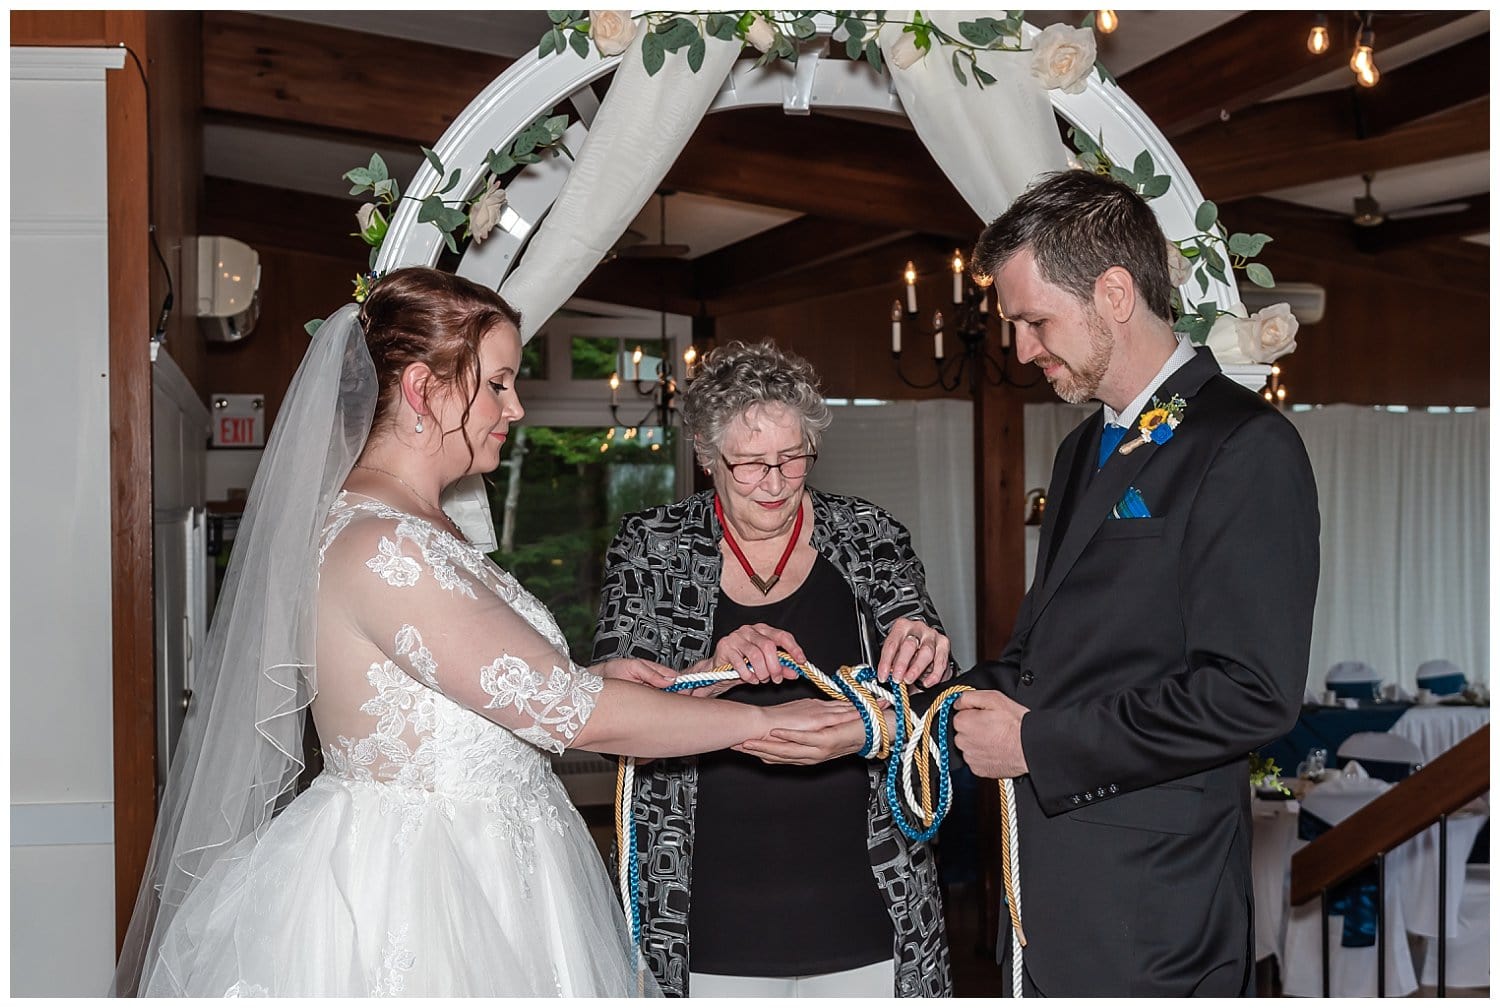 The bride and groom celebrate by having a handfasting knot tying ceremony during their wedding,